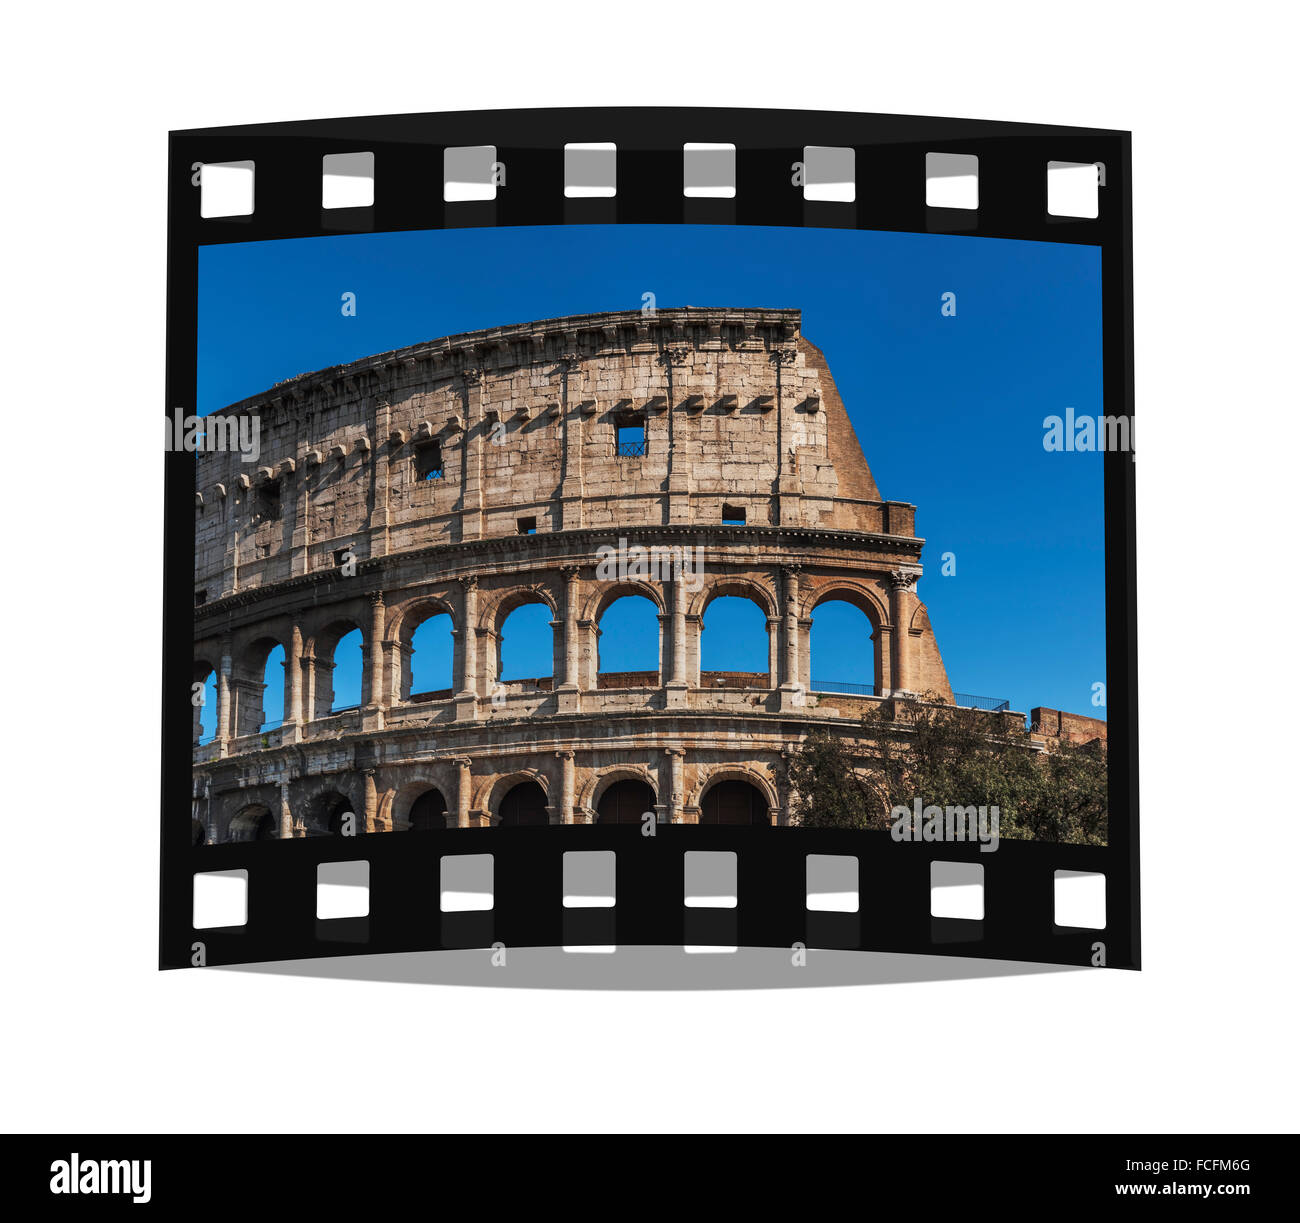 Colosseum architecture location Cut Out Stock Images